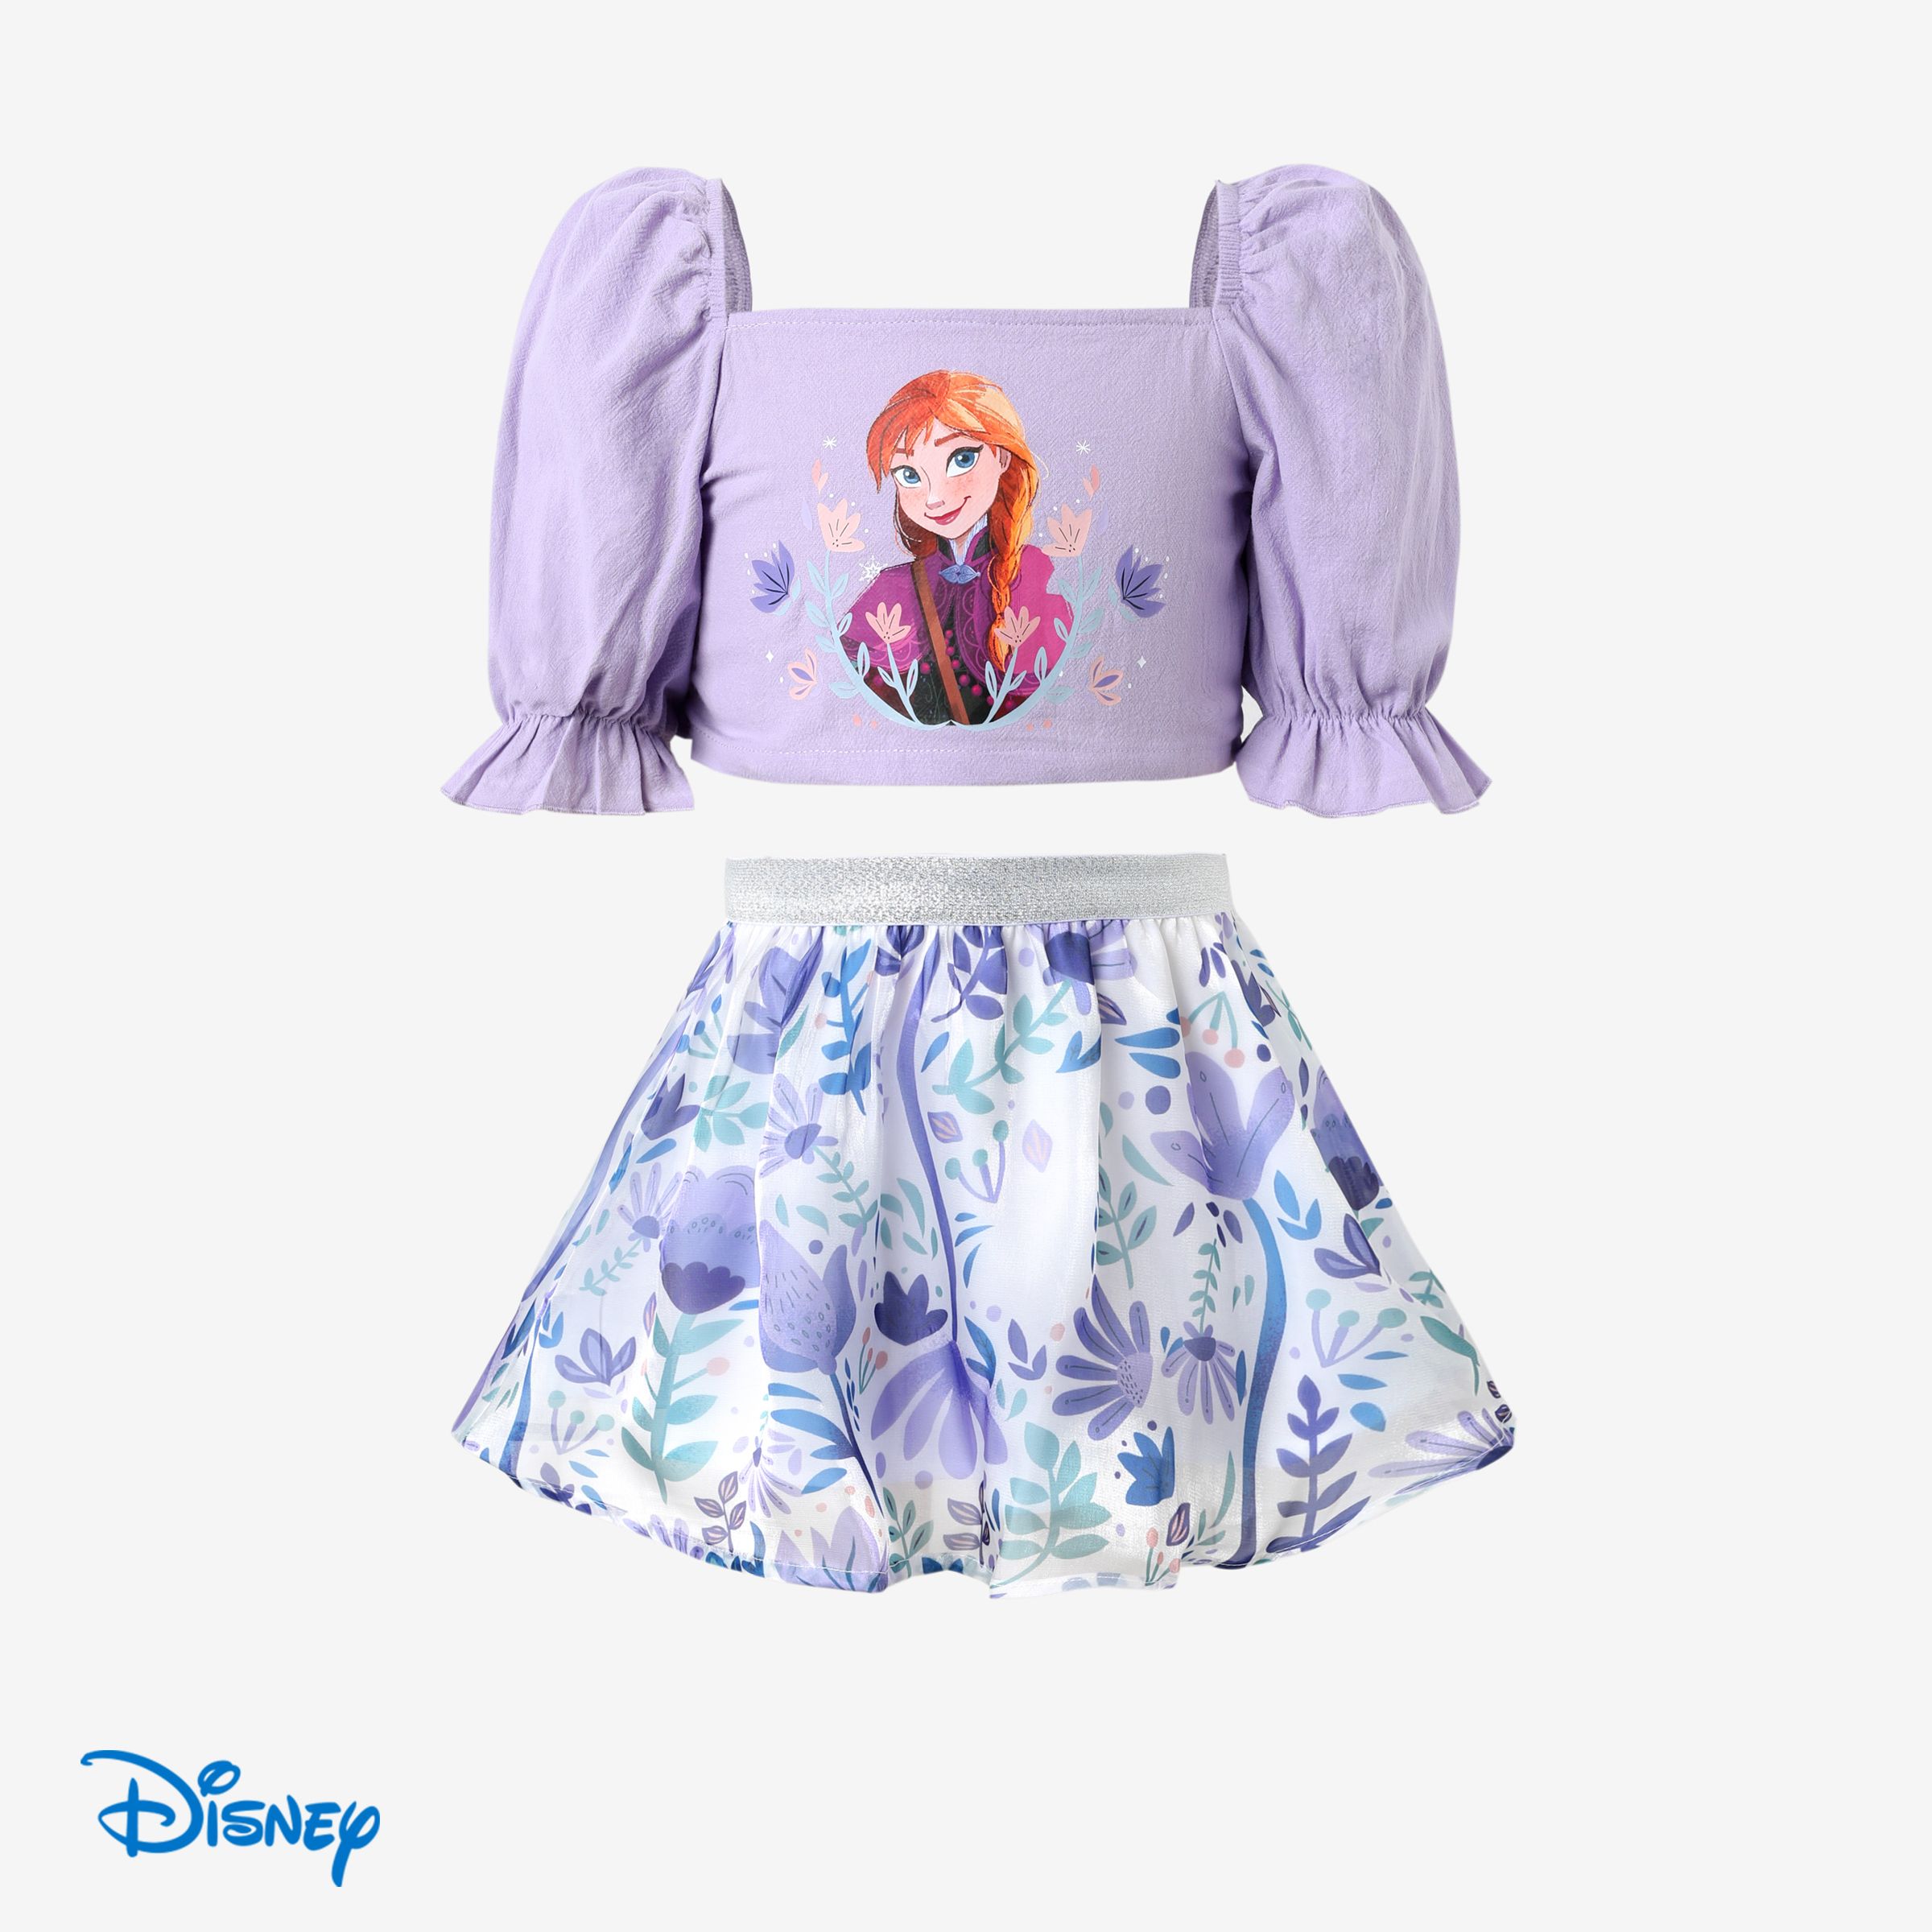 

Disney Frozen Elsa/Anna 2pcs Toddler Girls Character Print Puff Sleeves Top with Floral Skirts Set